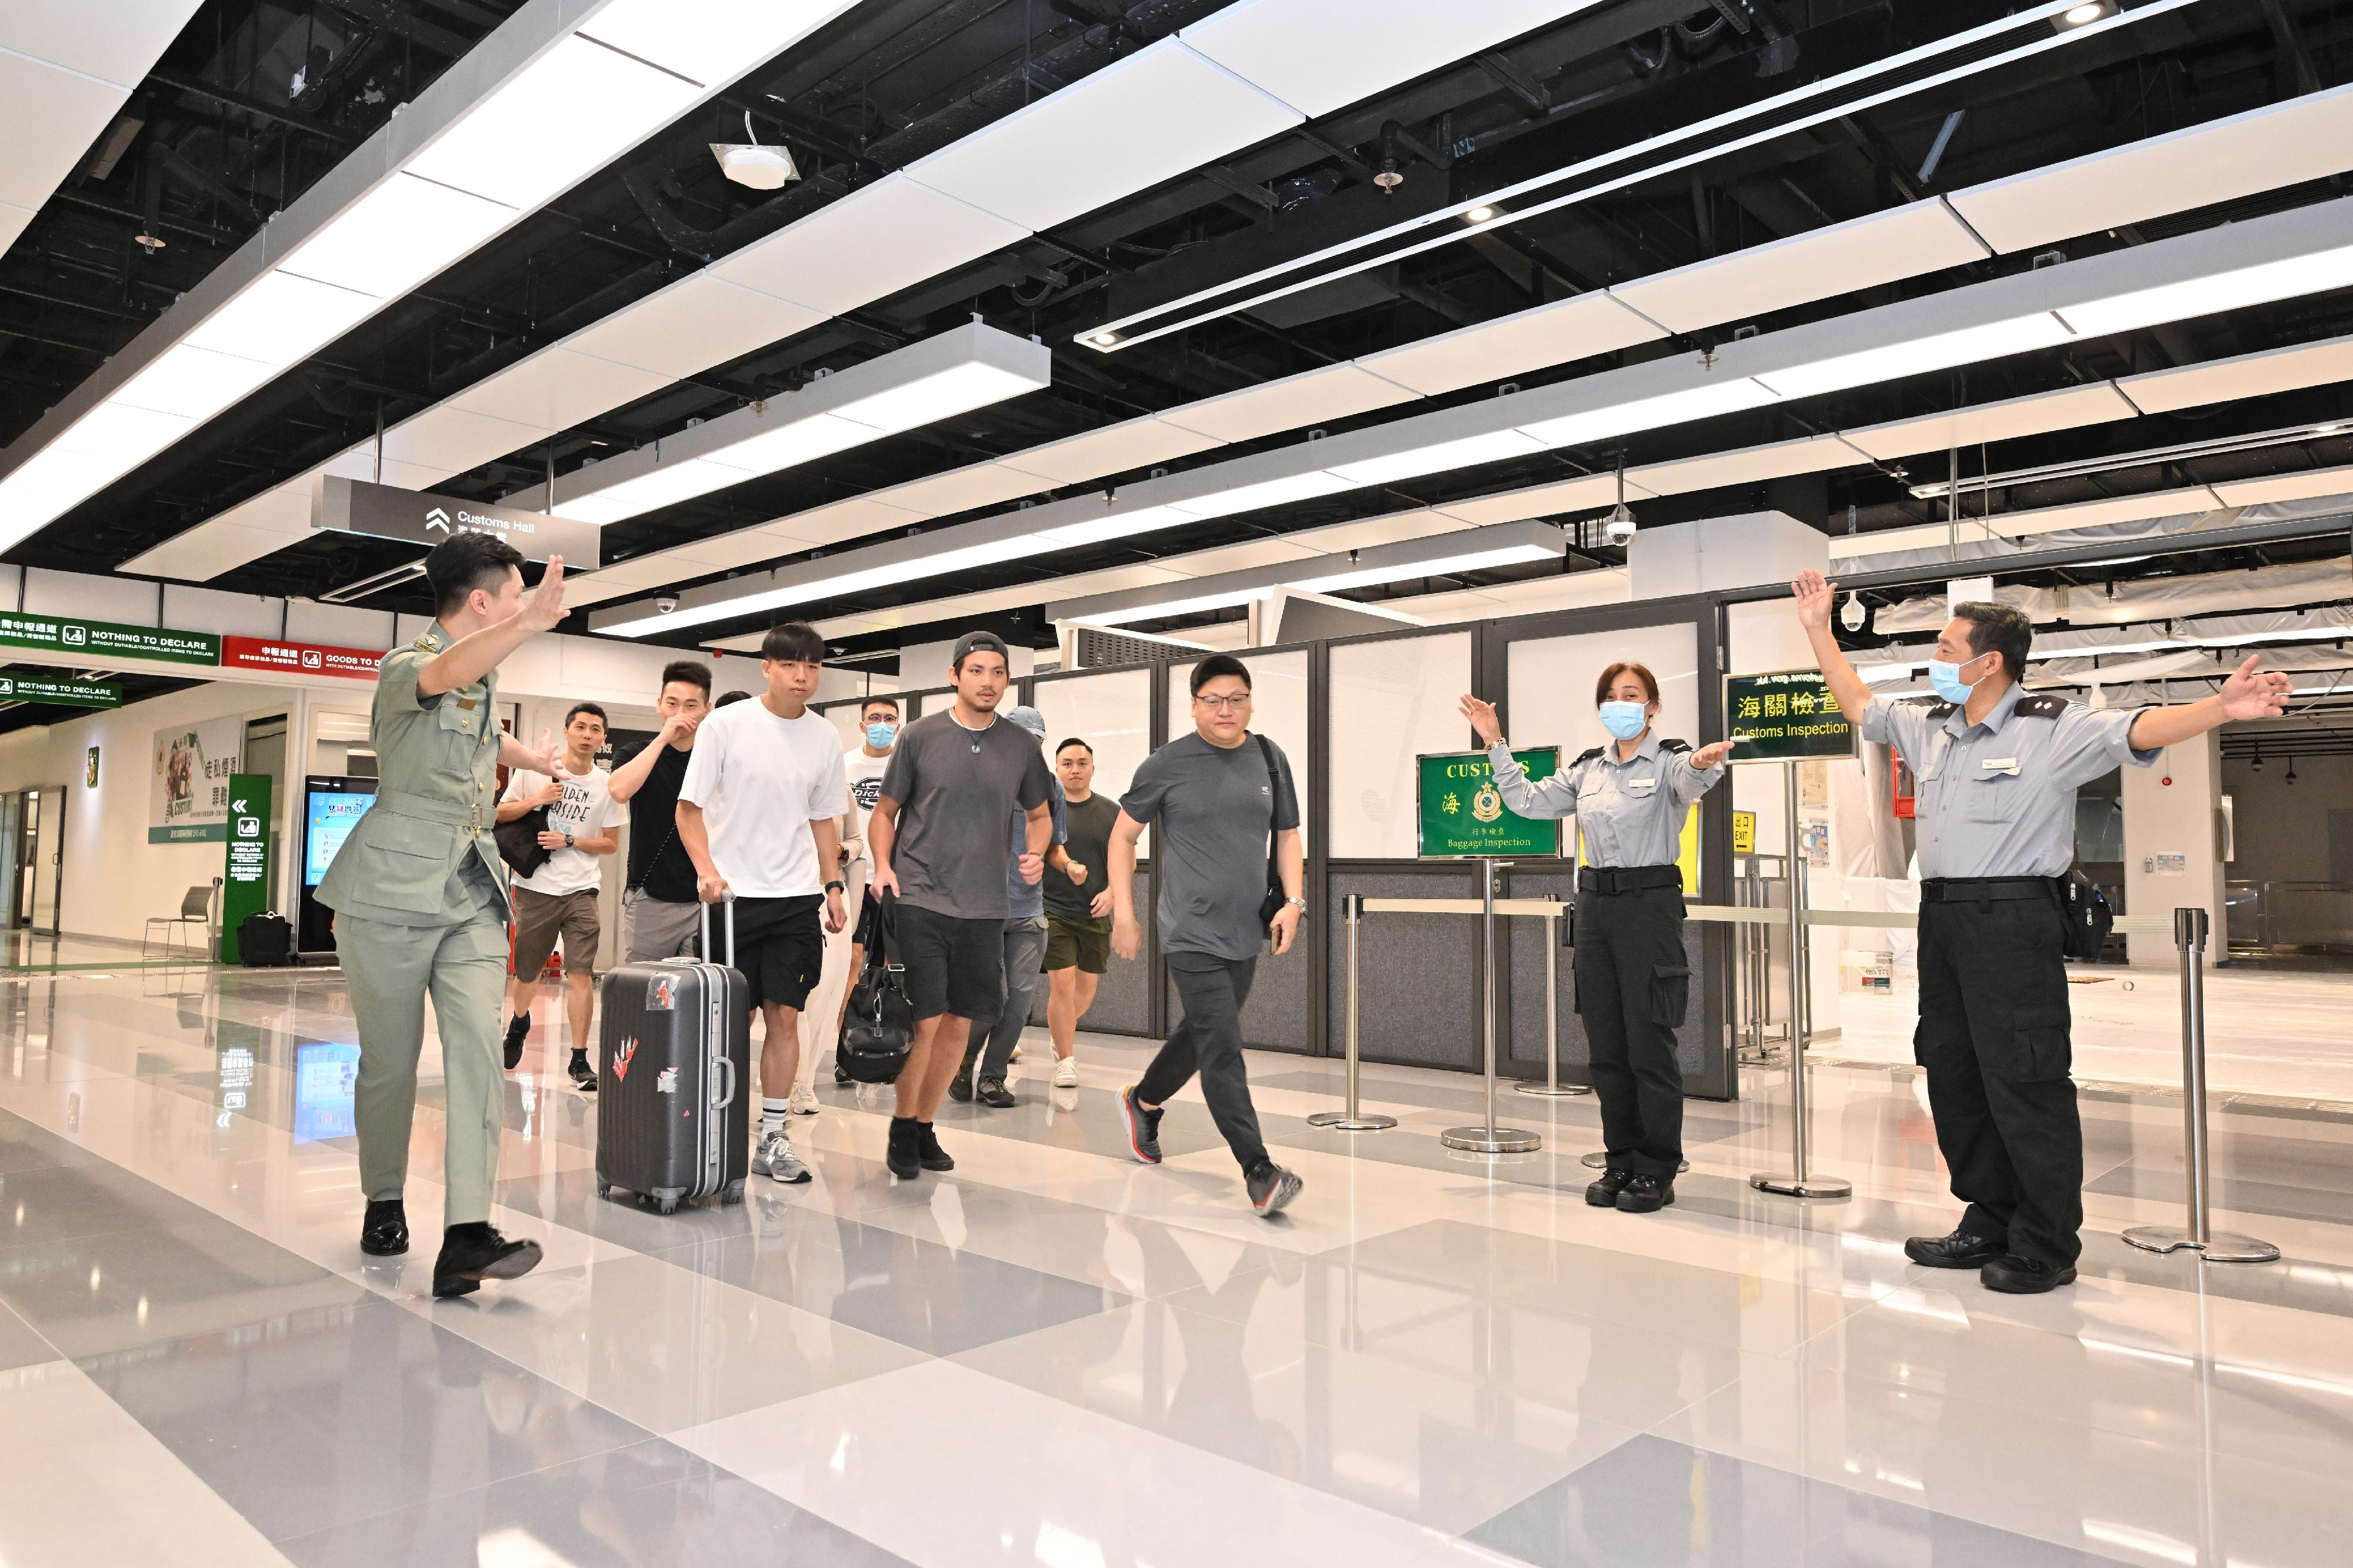 Hong Kong Customs and the Fire Services Department co-organised a counter-terrorism exercise codenamed "GATEKEEPER II" this afternoon (May 30) at the Ocean Terminal. Photo shows Customs officers and on-duty security guards of the Ocean Terminal evacuating people at the scene in an orderly and safe manner.